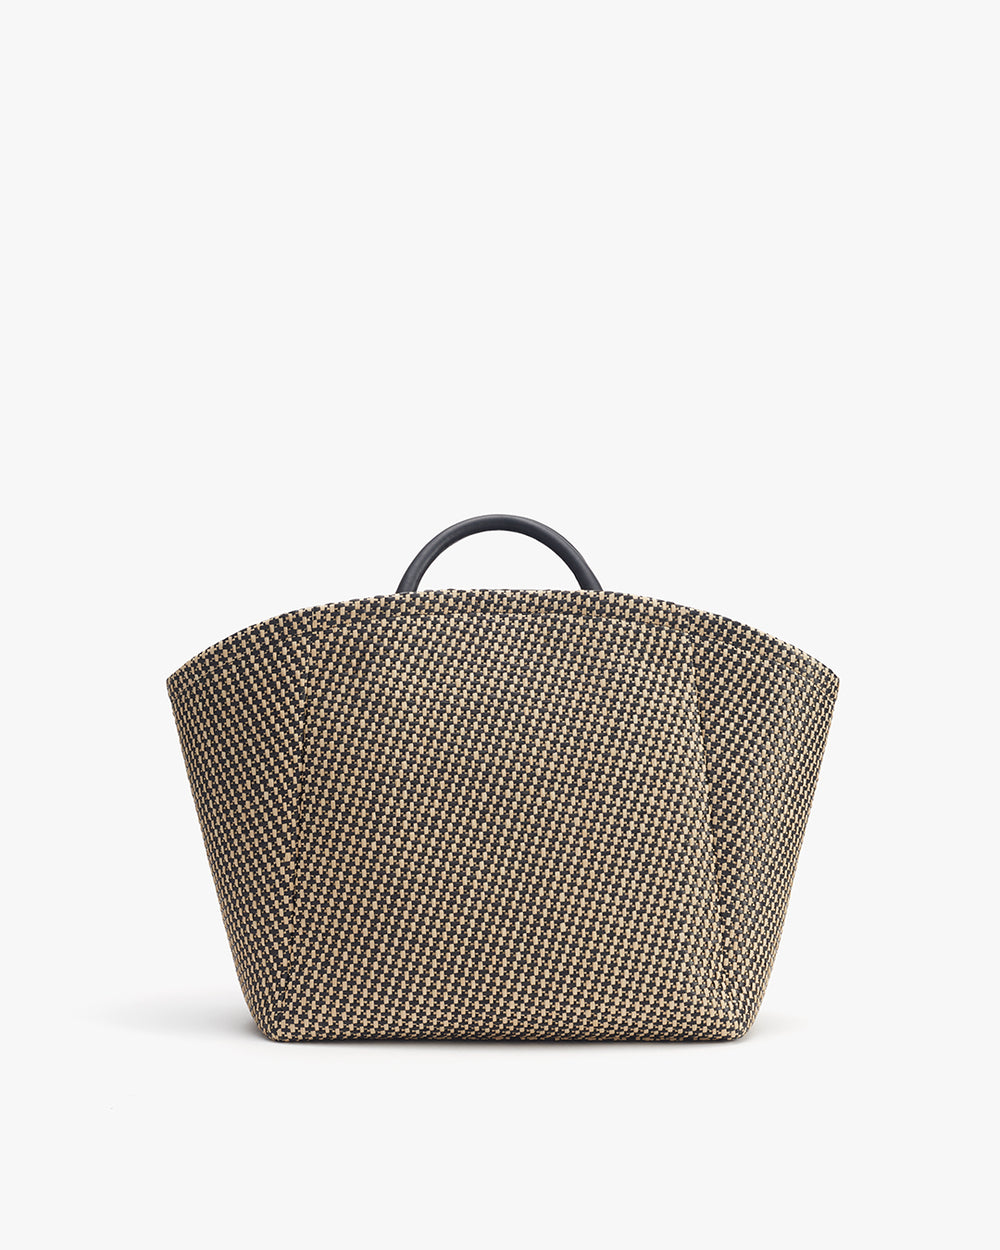 Patterned tote bag with handles on a plain background.